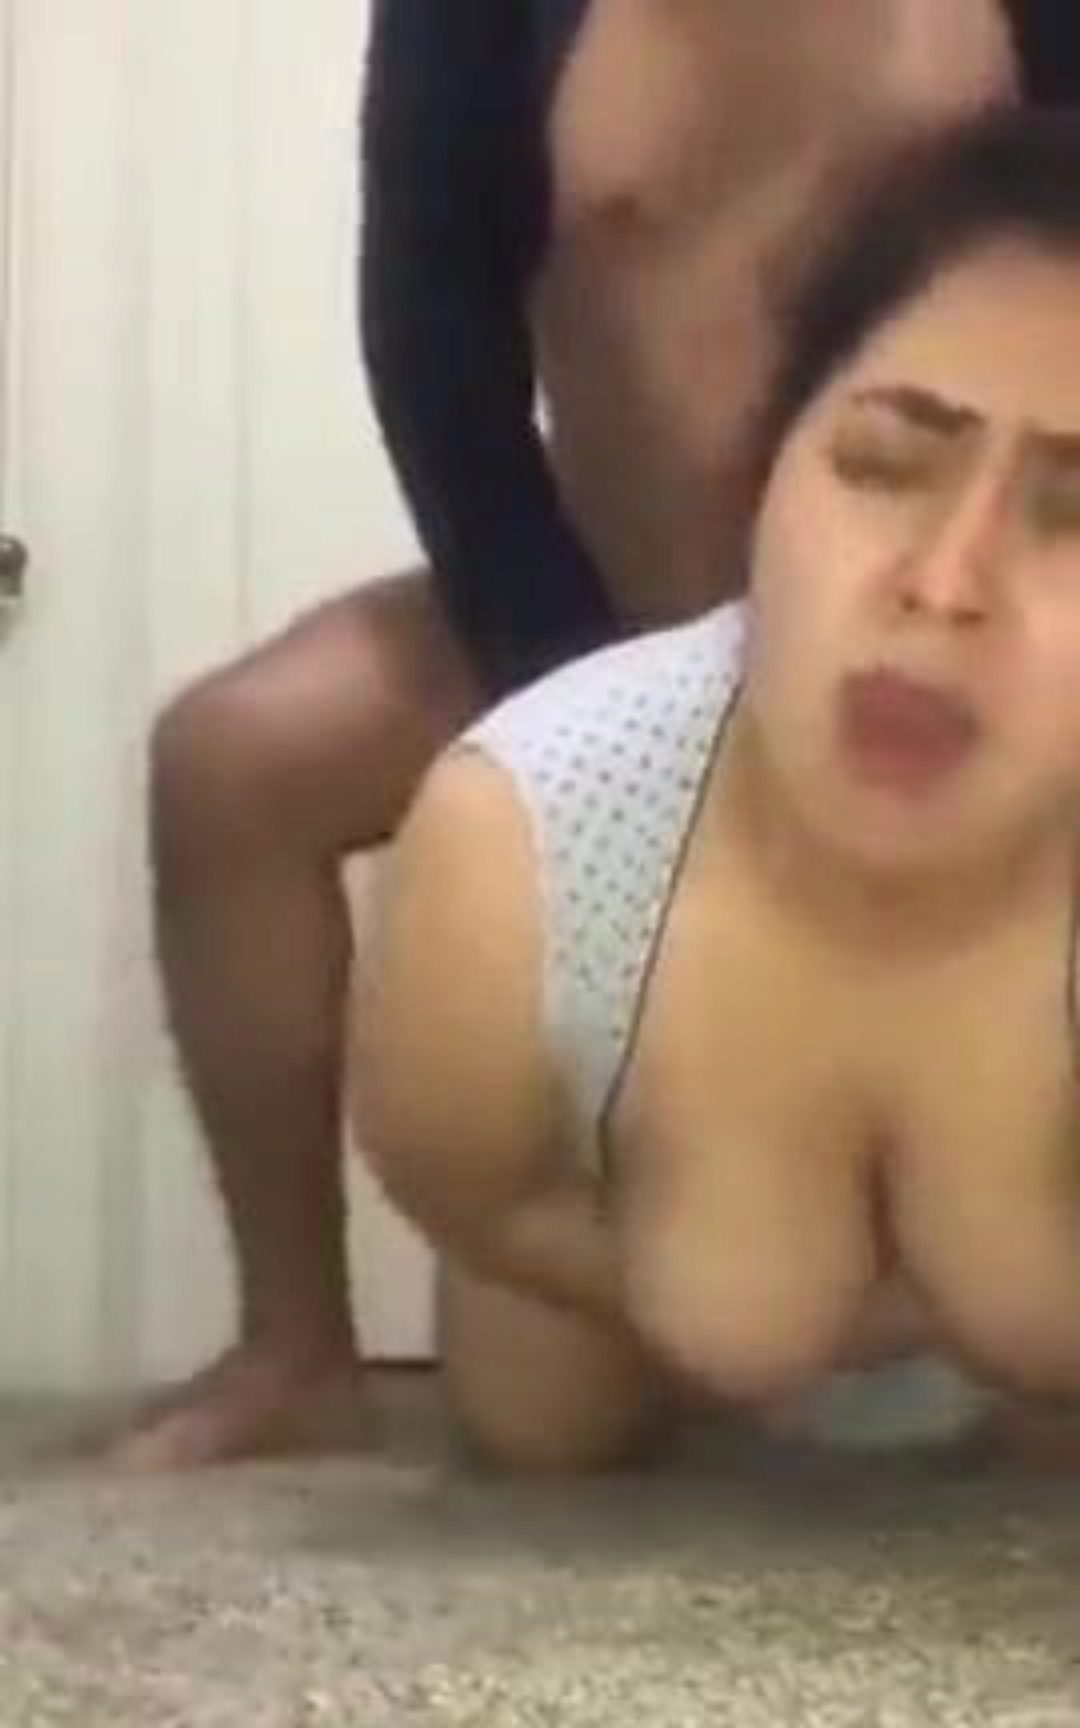 Indian Brother With Real Hindi Sex Sister Homemade Alone Real Sex Videos pic